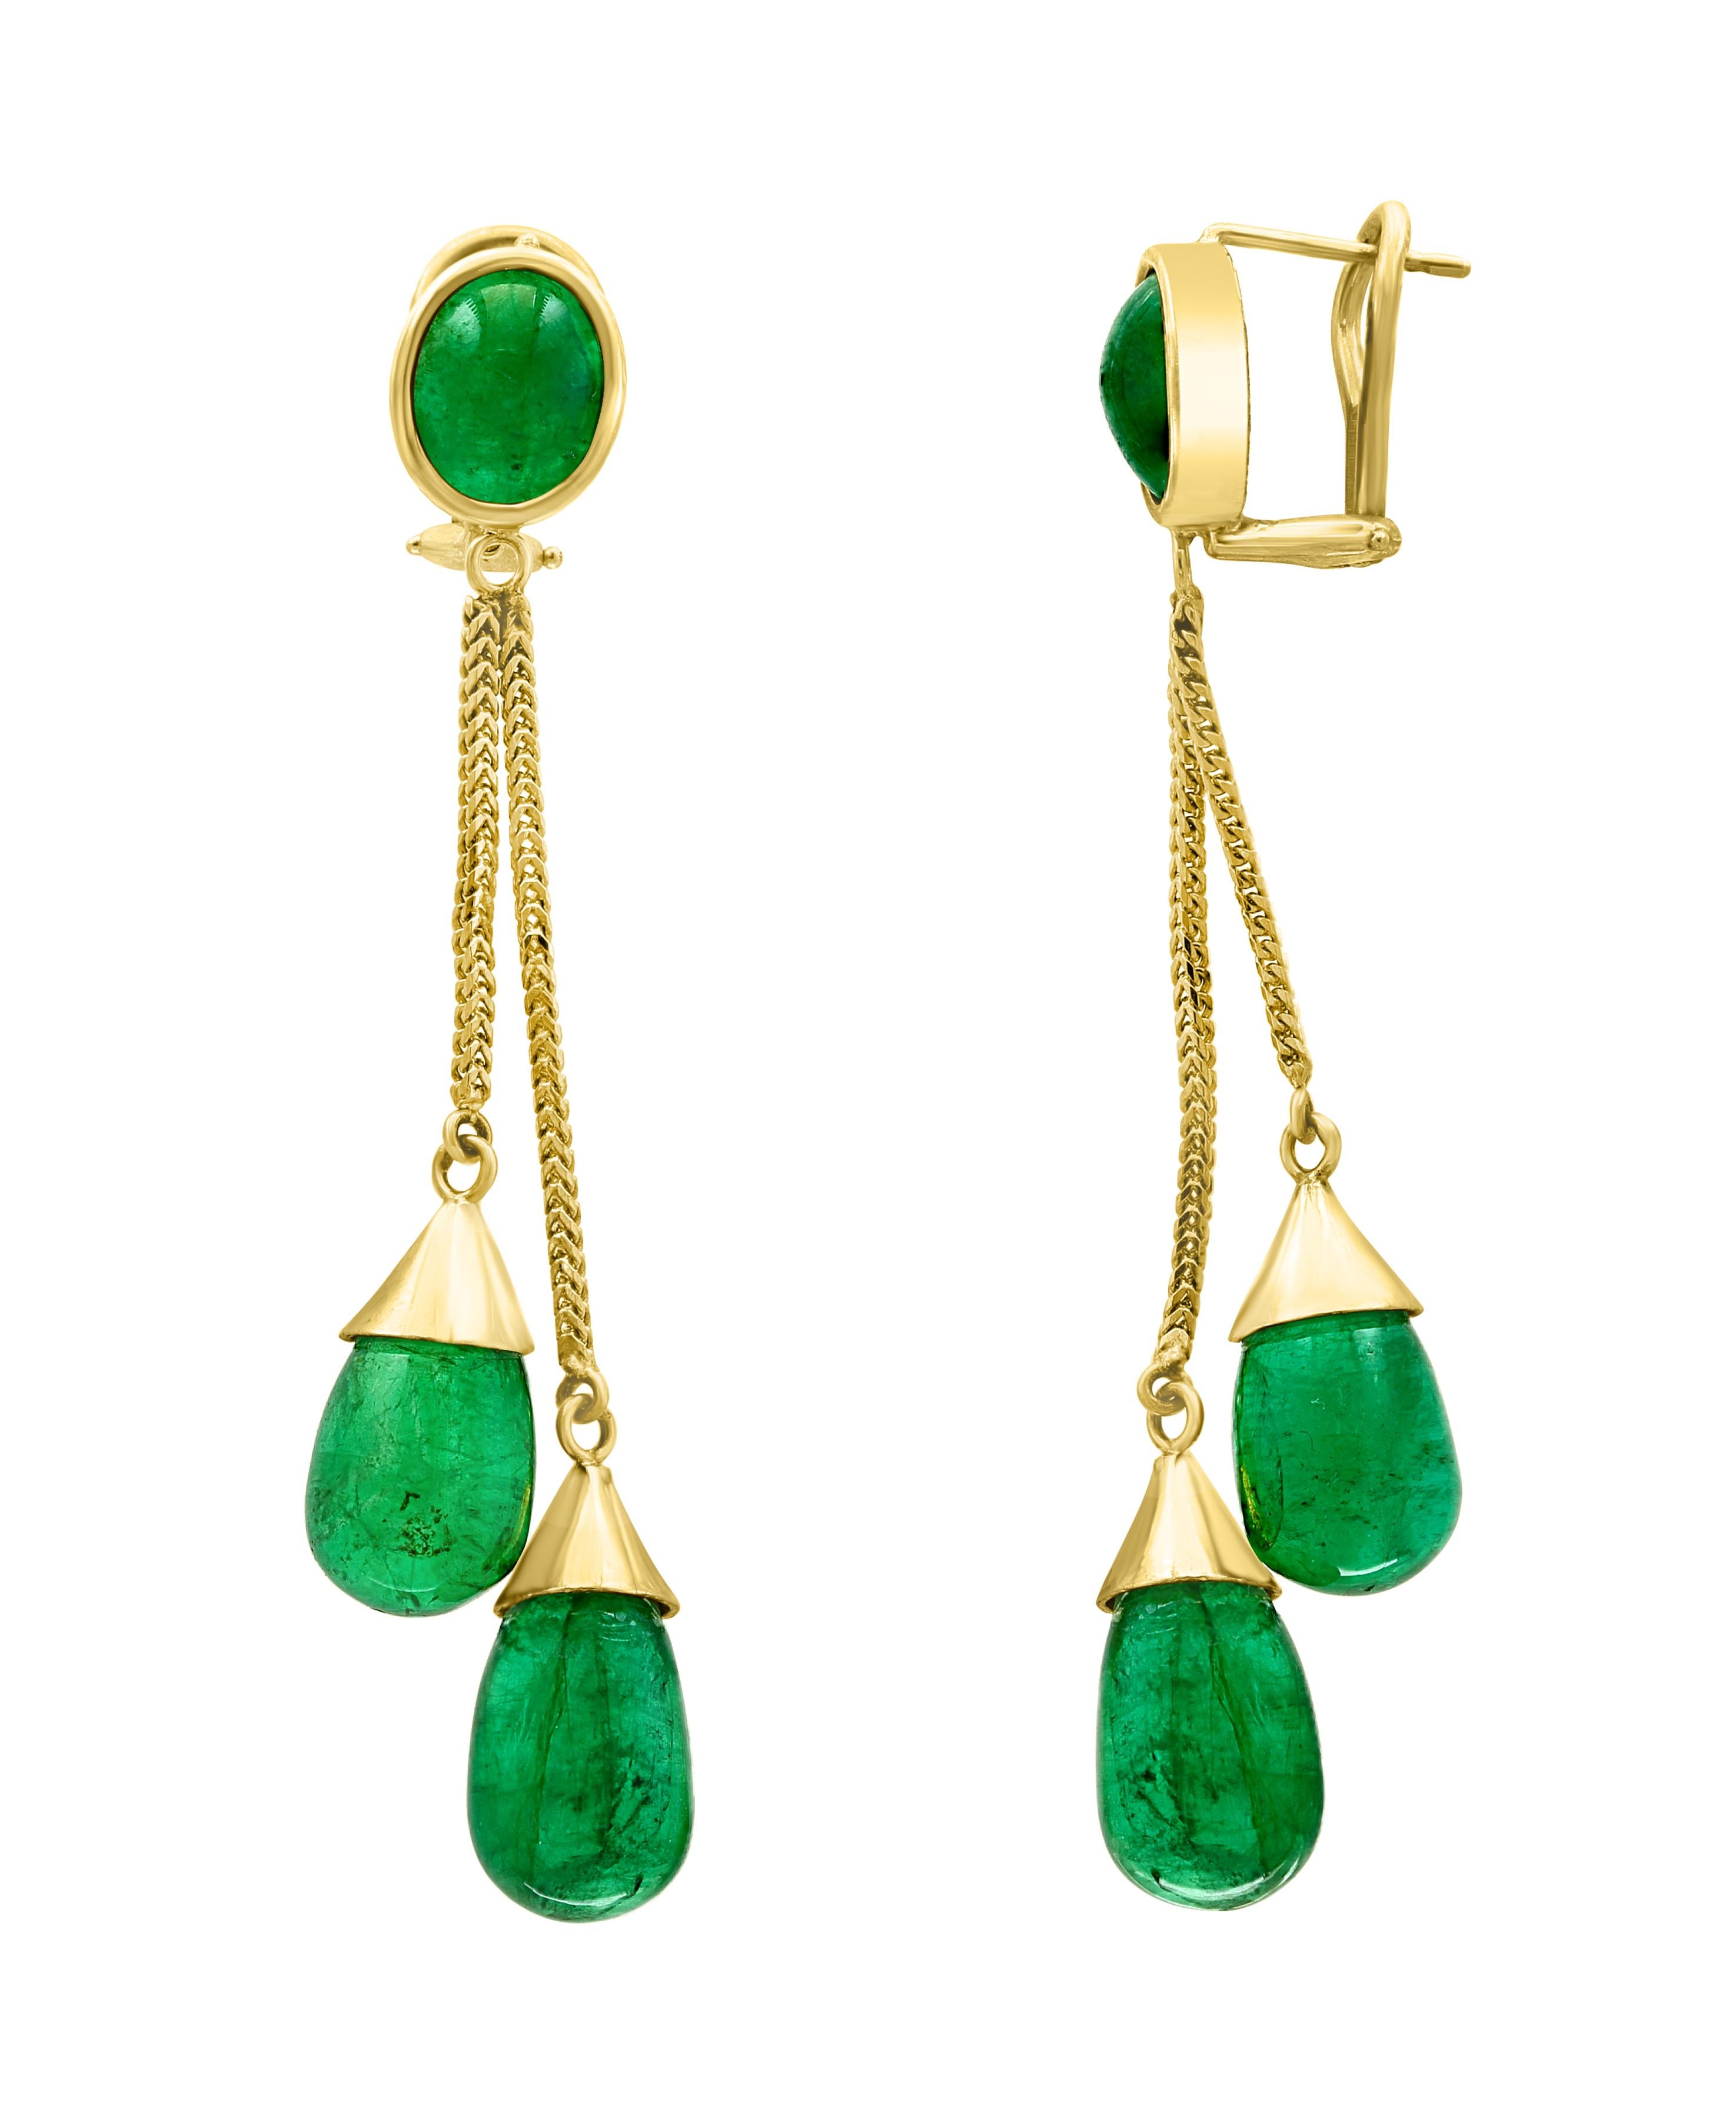 45  Carats Emerald Drop Earrings  18 K Gold
This exquisite pair of earrings are beautifully crafted with 18 karat yellow gold  weighing 16.5 grams
Two fine  Cabochon Emerald   weighing approximately 7 carats and approximately 45 carats of Emerald